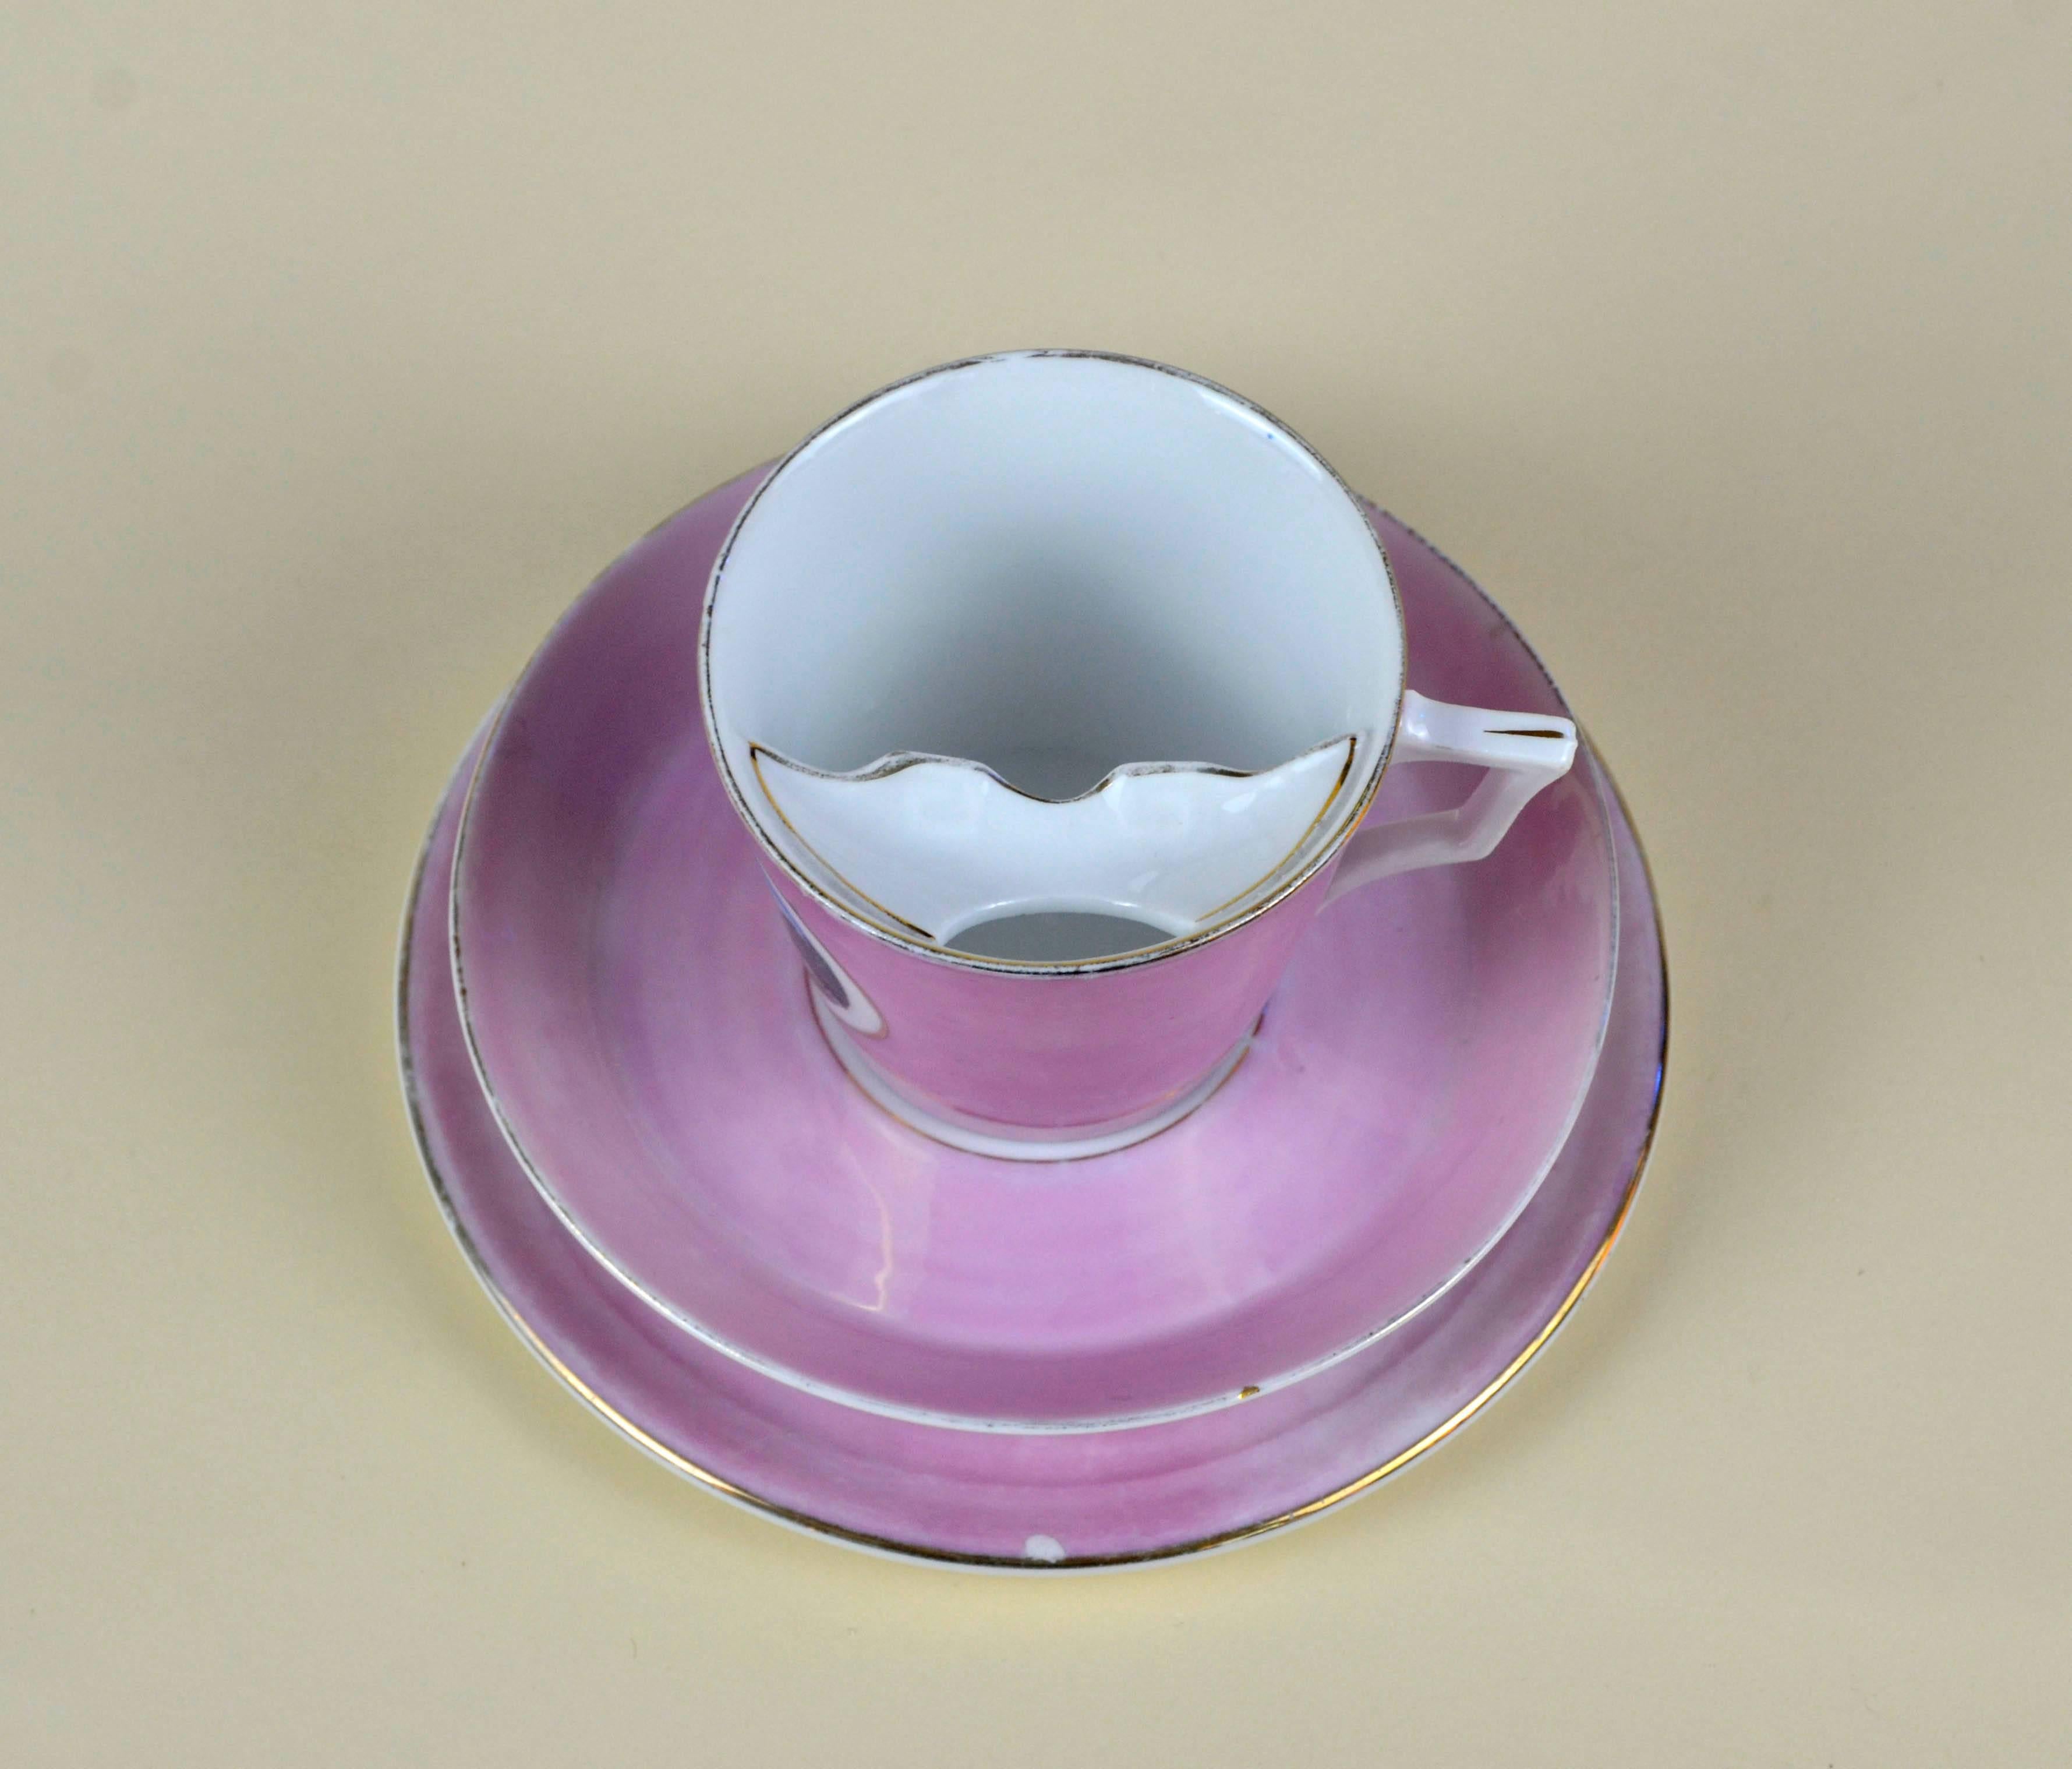 1900s Porcelain Souvenir Mustache Cup in Antique Pink Lustre Made in Germany For Sale 3